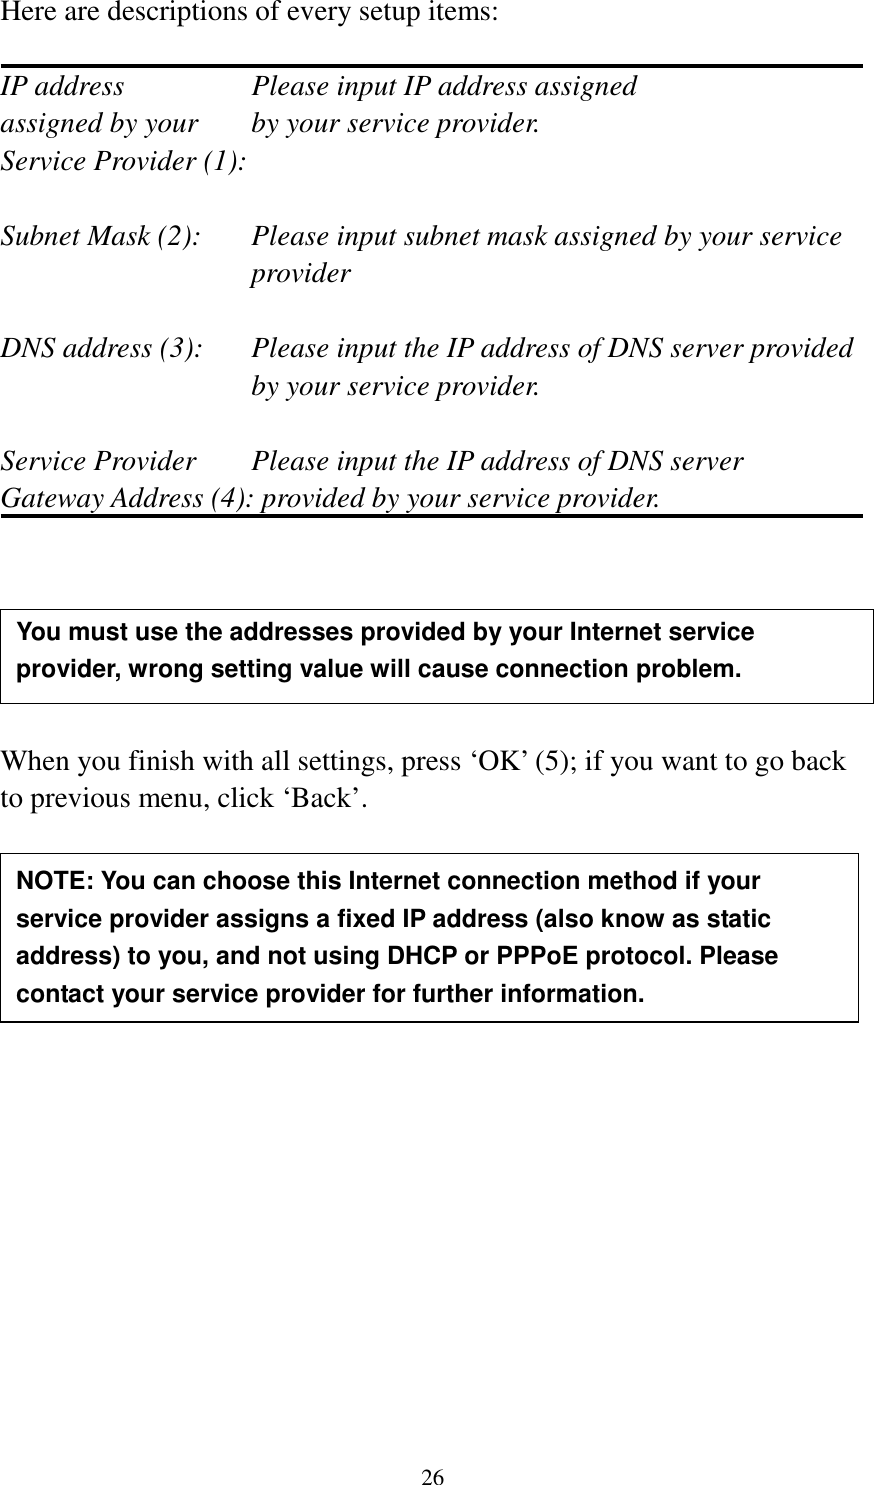 26 Here are descriptions of every setup items:  IP address        Please input IP address assigned assigned by your    by your service provider. Service Provider (1):    Subnet Mask (2):    Please input subnet mask assigned by your service provider    DNS address (3):    Please input the IP address of DNS server provided by your service provider.  Service Provider    Please input the IP address of DNS server Gateway Address (4): provided by your service provider.       When you finish with all settings, press ‘OK’ (5); if you want to go back to previous menu, click ‘Back’.                 NOTE: You can choose this Internet connection method if your service provider assigns a fixed IP address (also know as static address) to you, and not using DHCP or PPPoE protocol. Please contact your service provider for further information. You must use the addresses provided by your Internet service provider, wrong setting value will cause connection problem.    